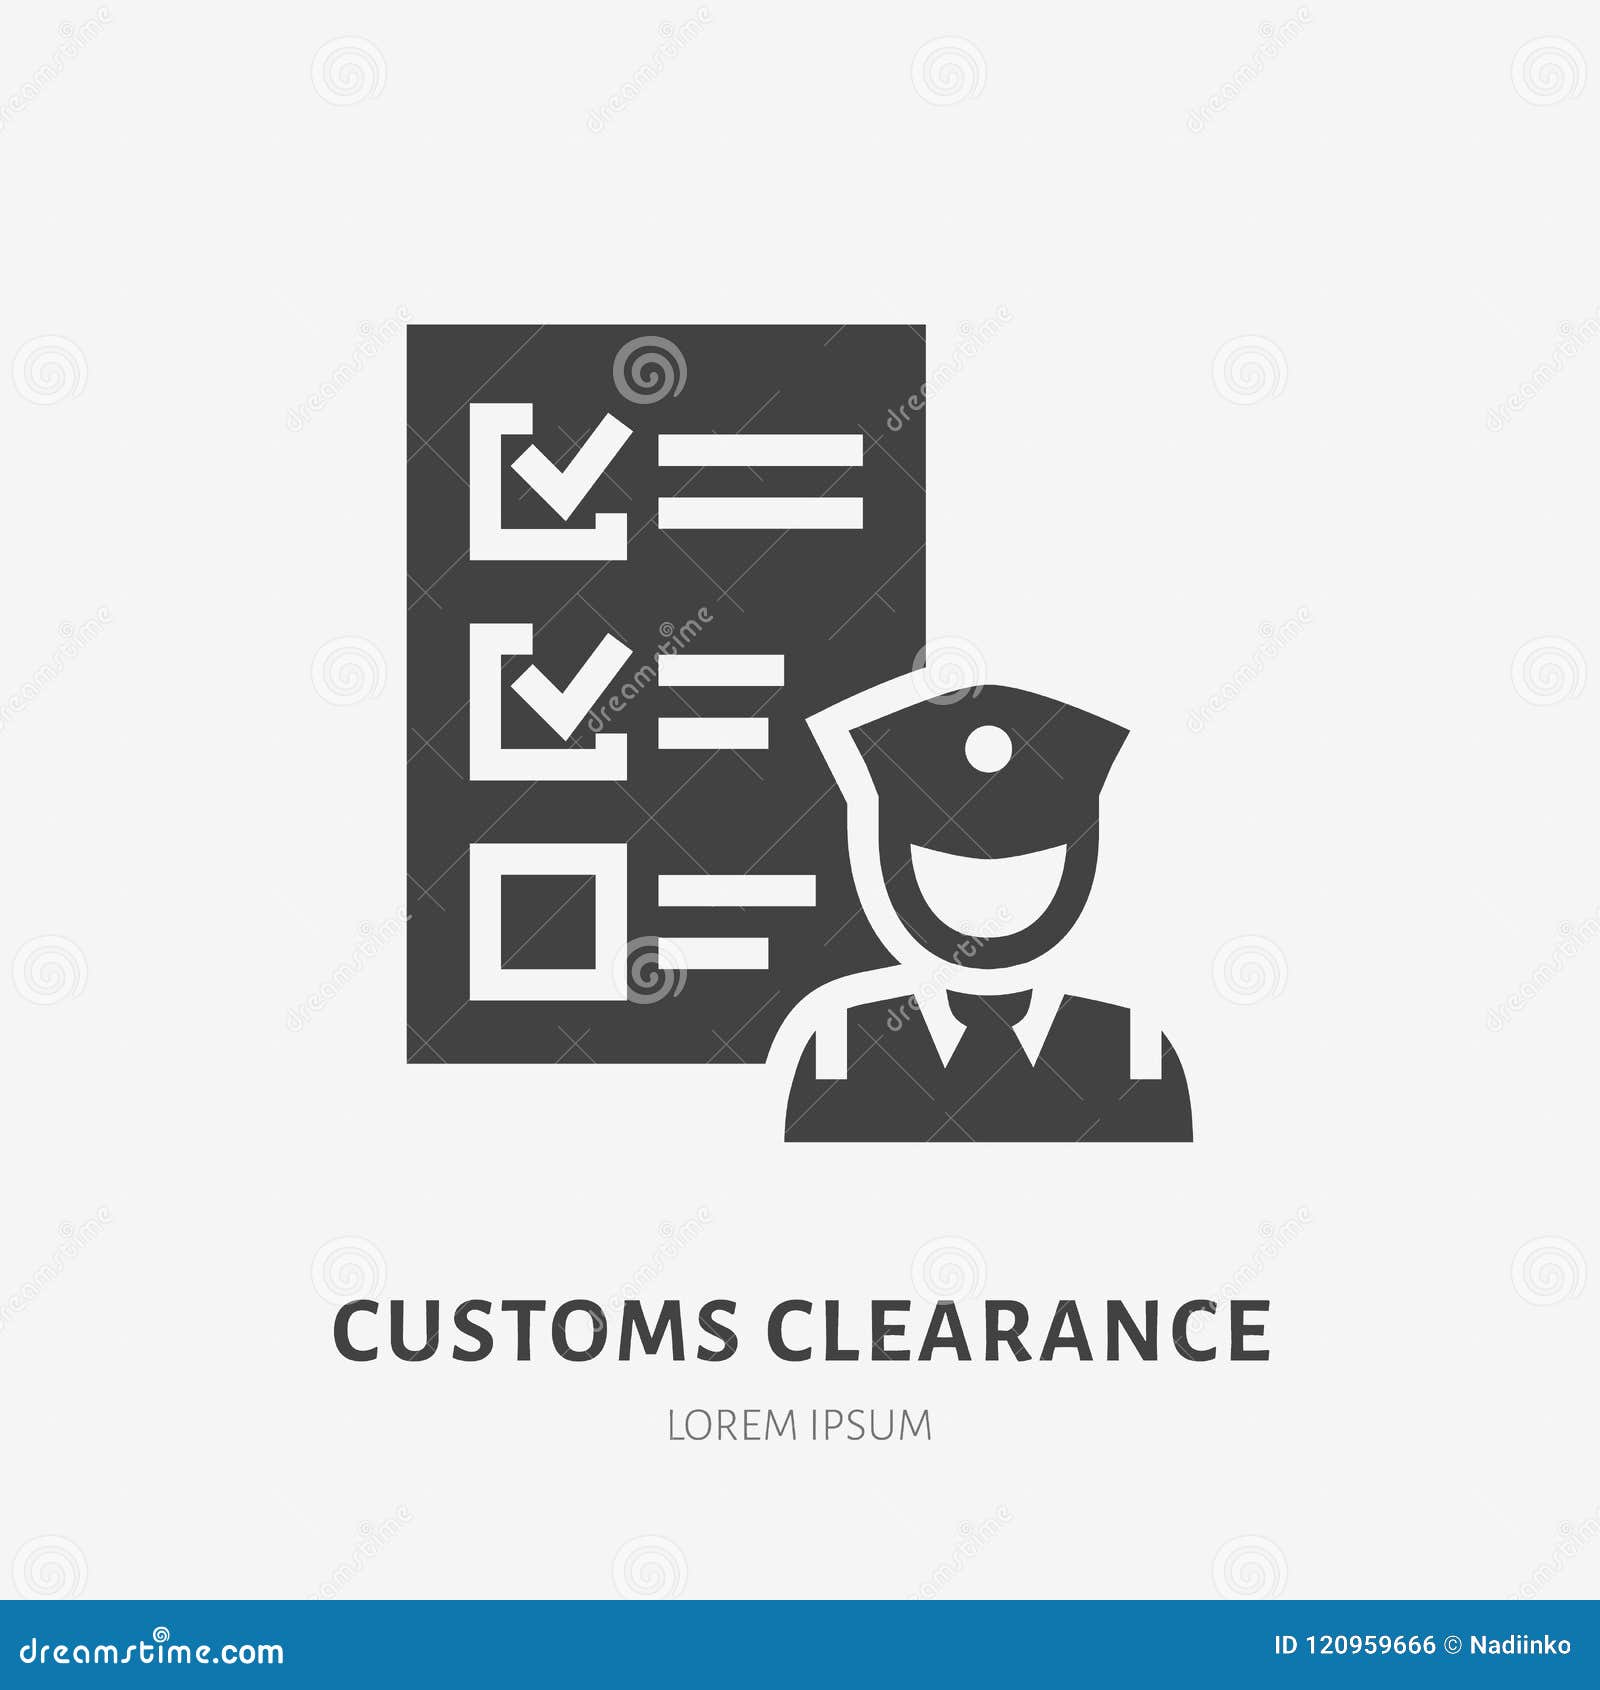 customs clearance flat glyph icon. policeman inspecting luggage sign. solid silhouette logo for cargo trucking, freight